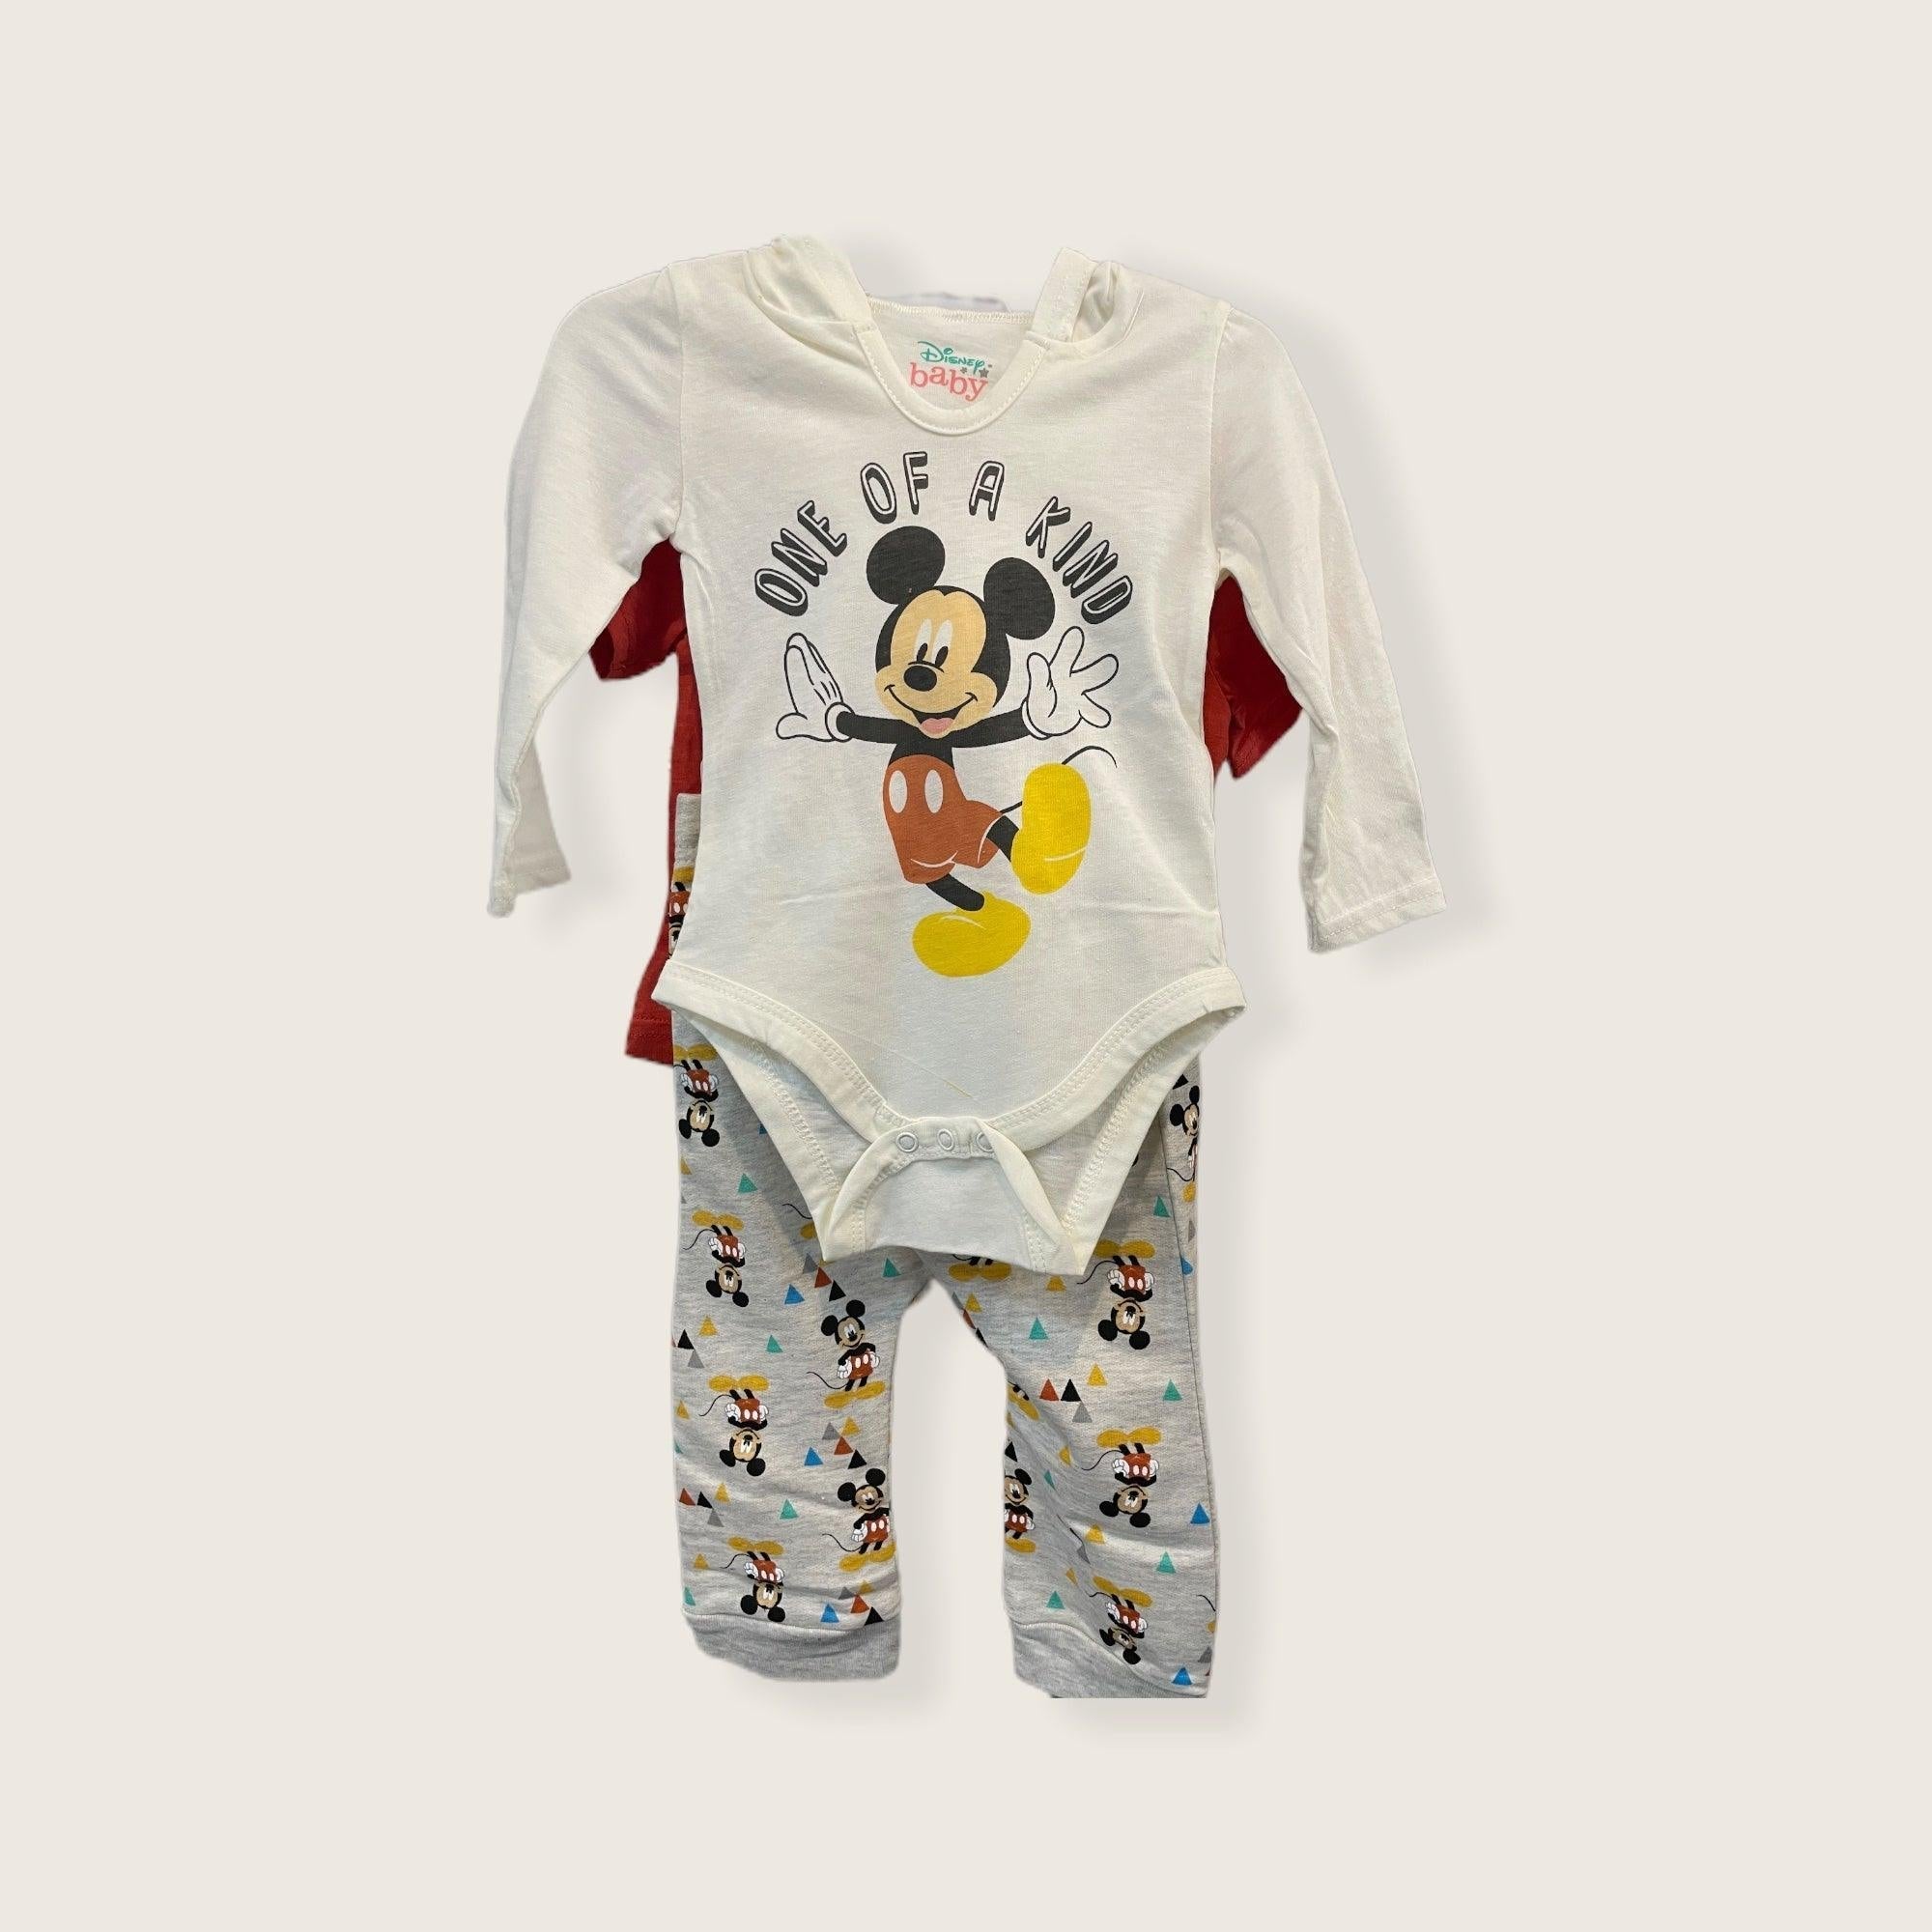 Disney Mickey Mouse 3 Pack Jogger, Onesie with Hood and Ears , and T-Shirt Set, Bodysuit Bundle for Baby